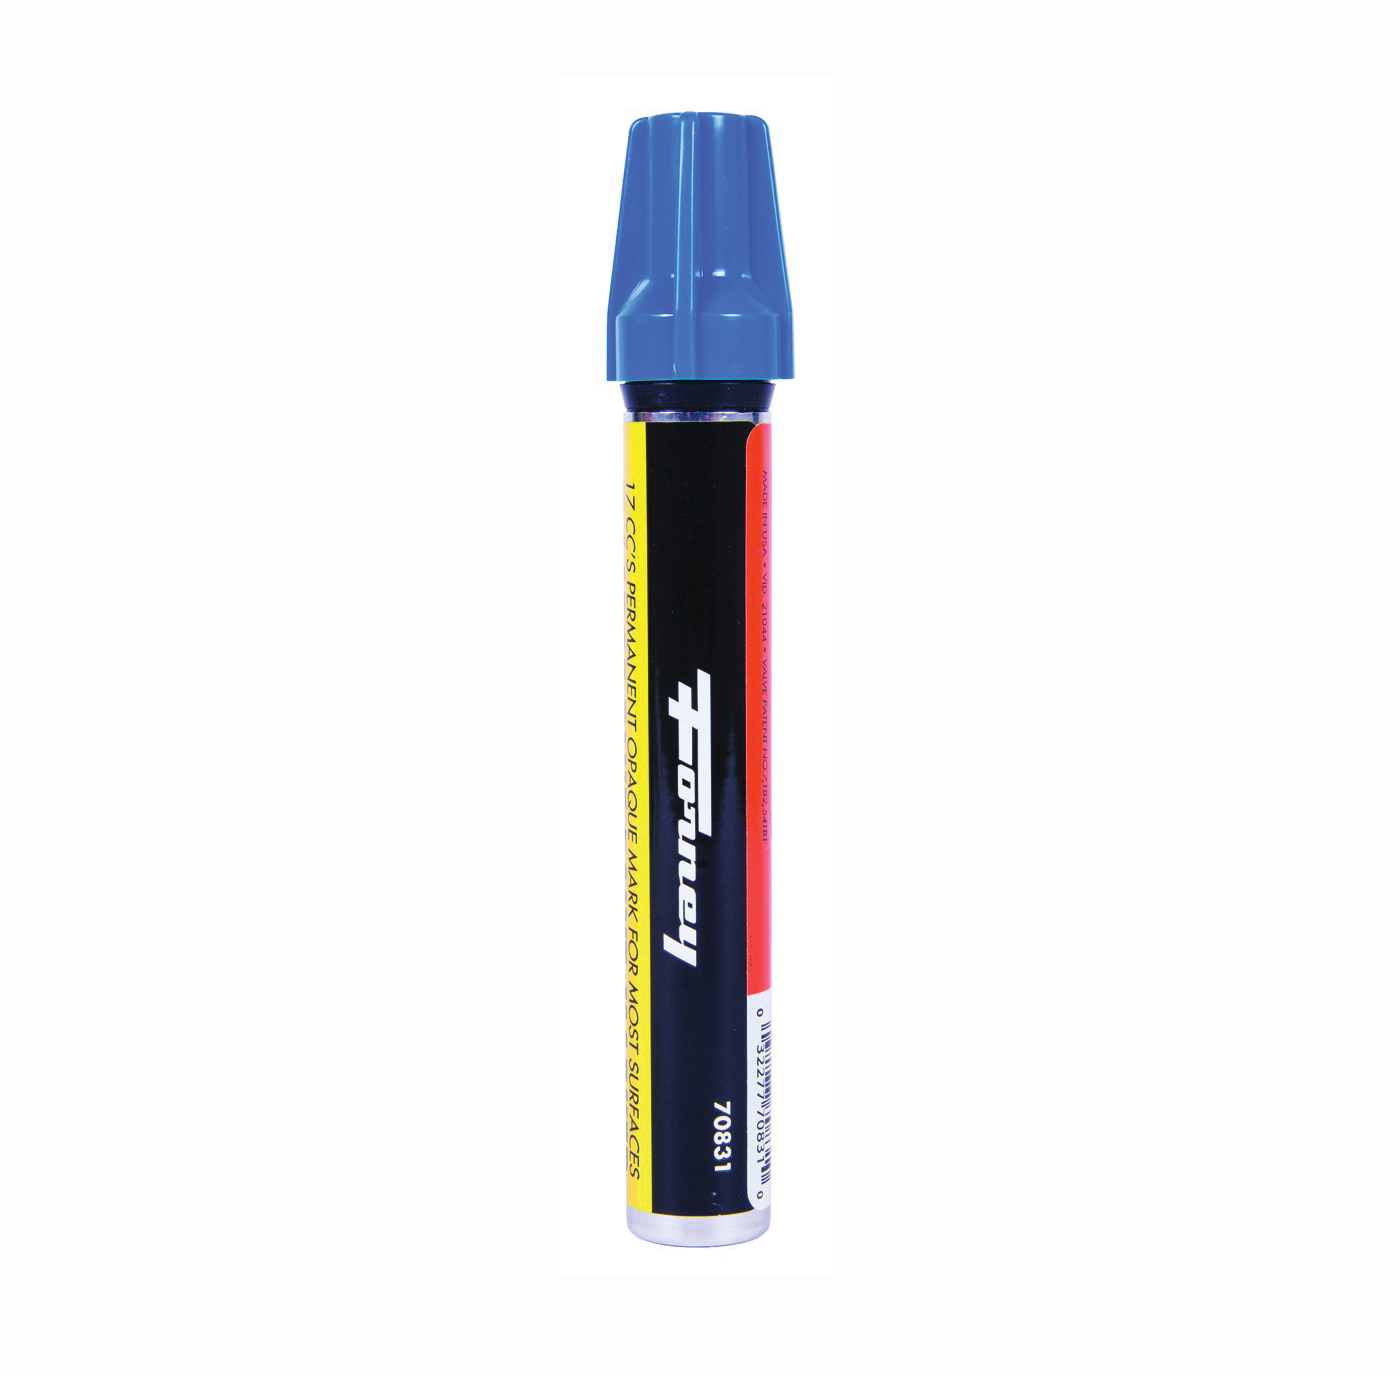 Forney 70831 Paint Marker, XL Tip, Blue